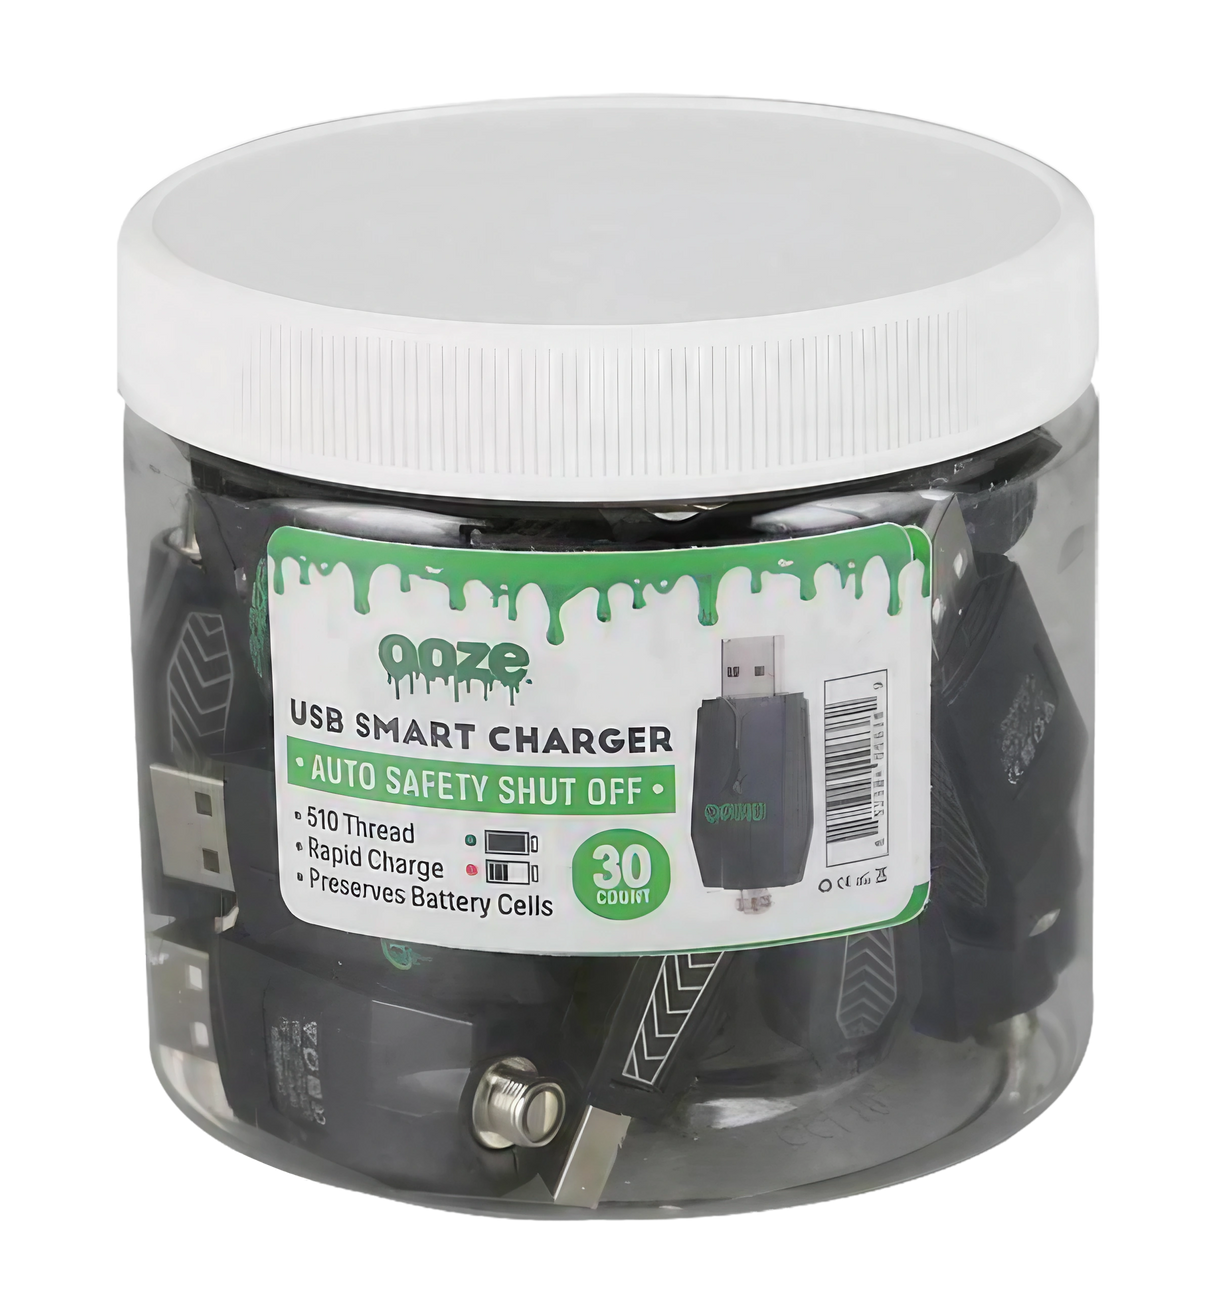 Ooze USB Smart Chargers 30pc display with 510 thread for vape batteries